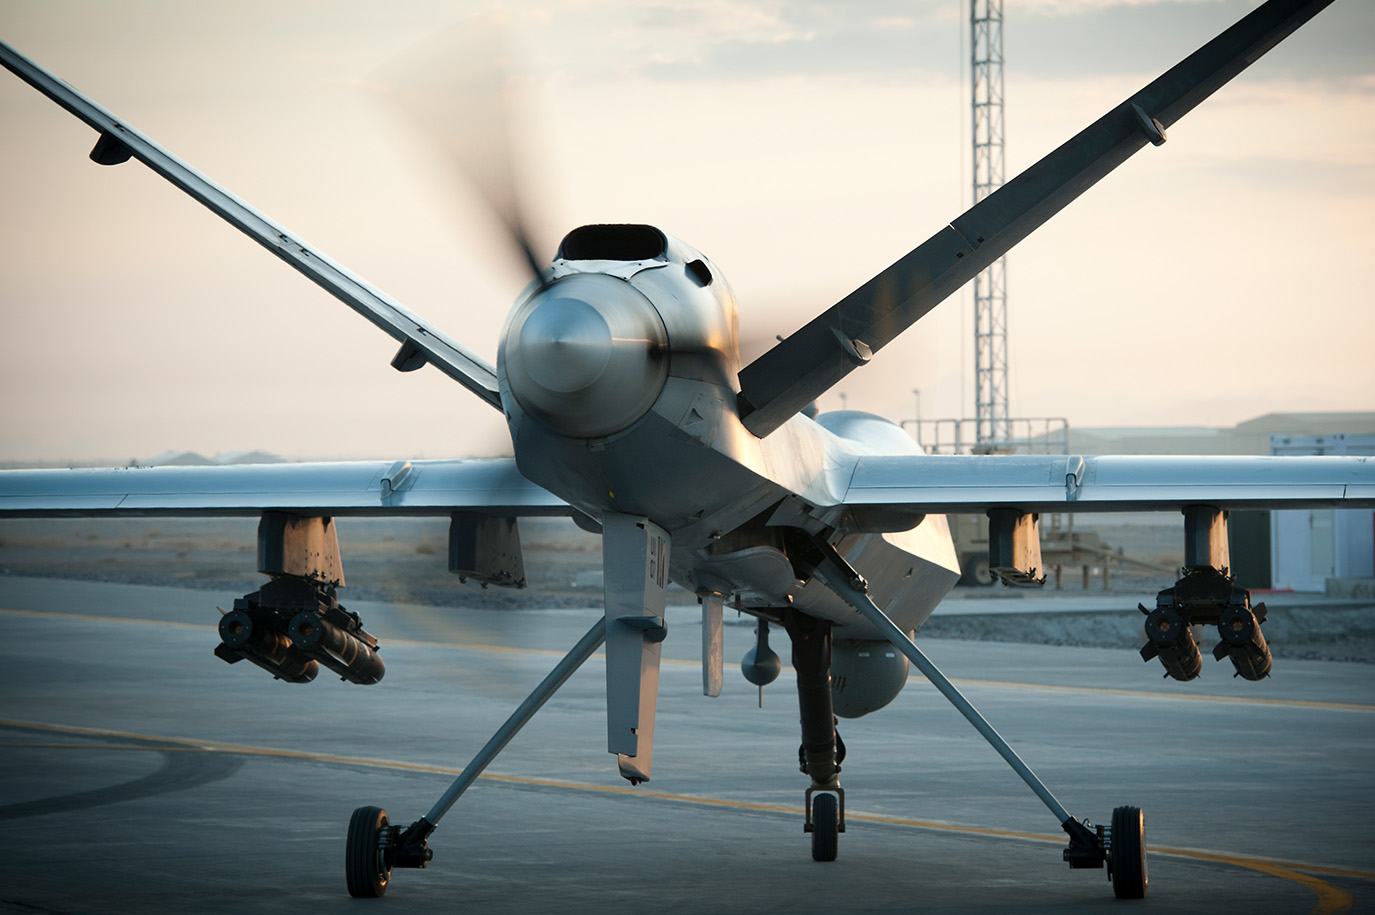 Image of a MQ-9 Reaper facing forward with propellors turning.